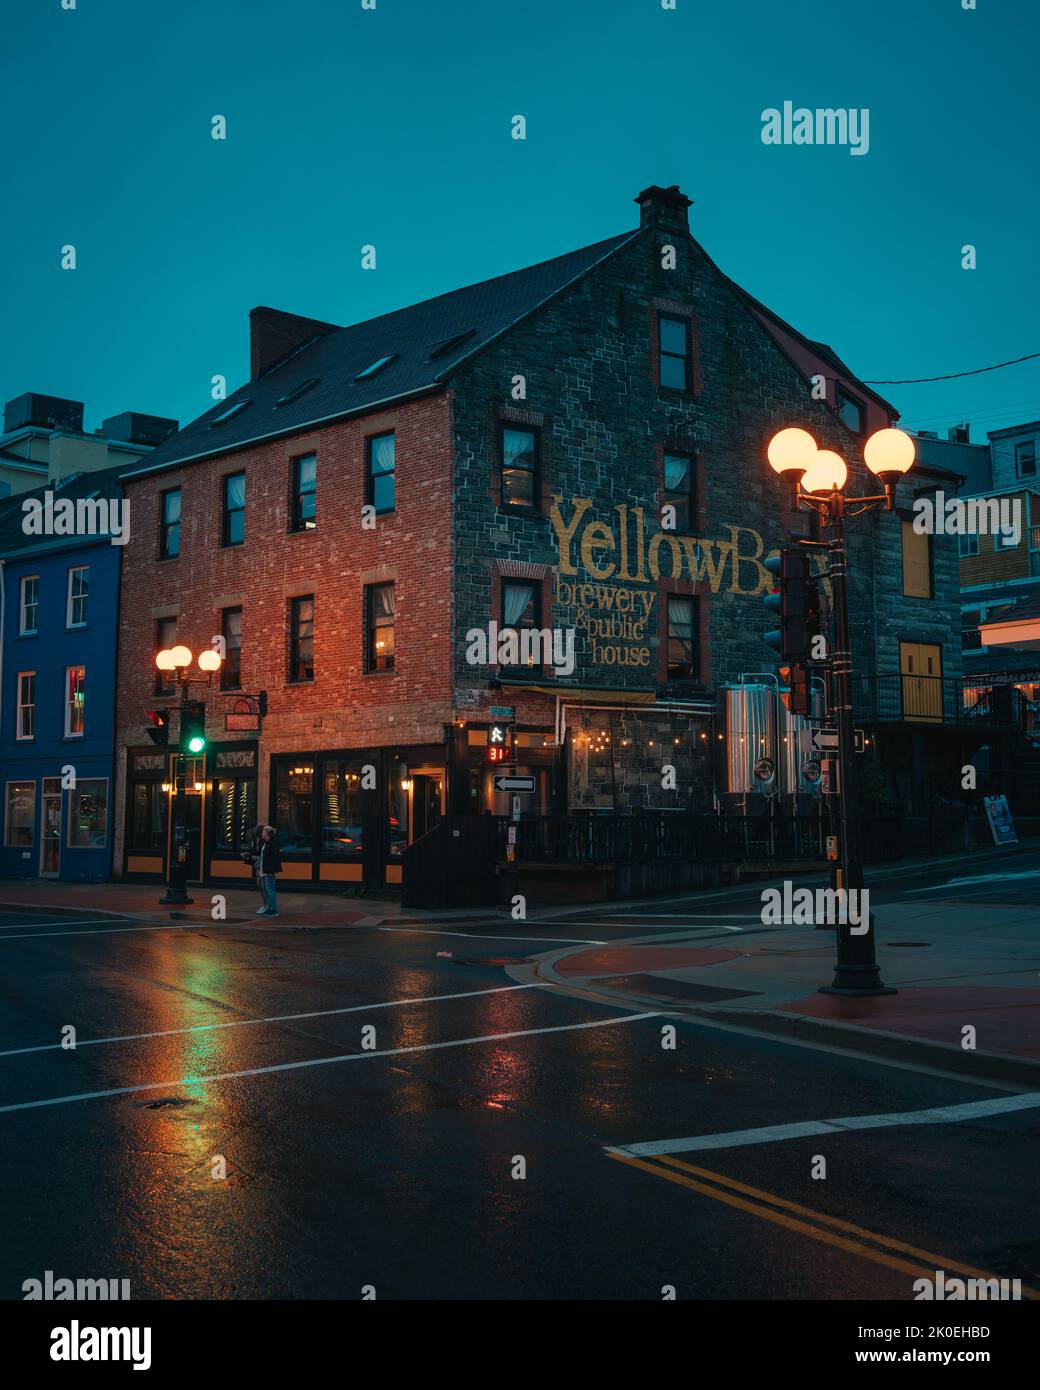 YellowBelly Brewery at night, St. Johns, Newfoundland and Labrador, Canada Stock Photo